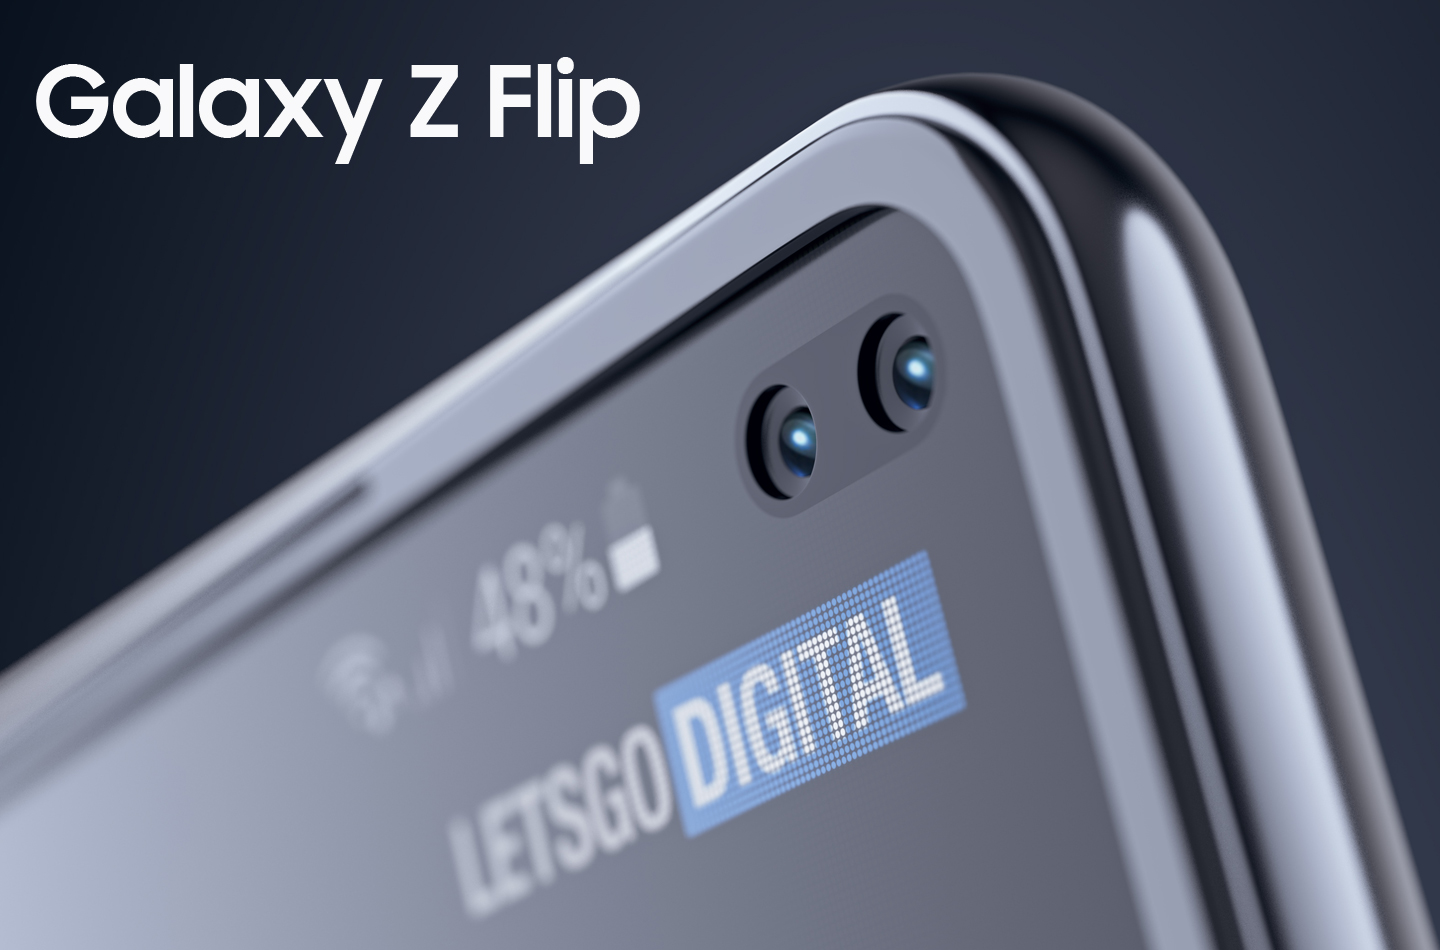 Samsung has come up with a smartphone Galaxy Z Flip, the screen of which folds in two directions